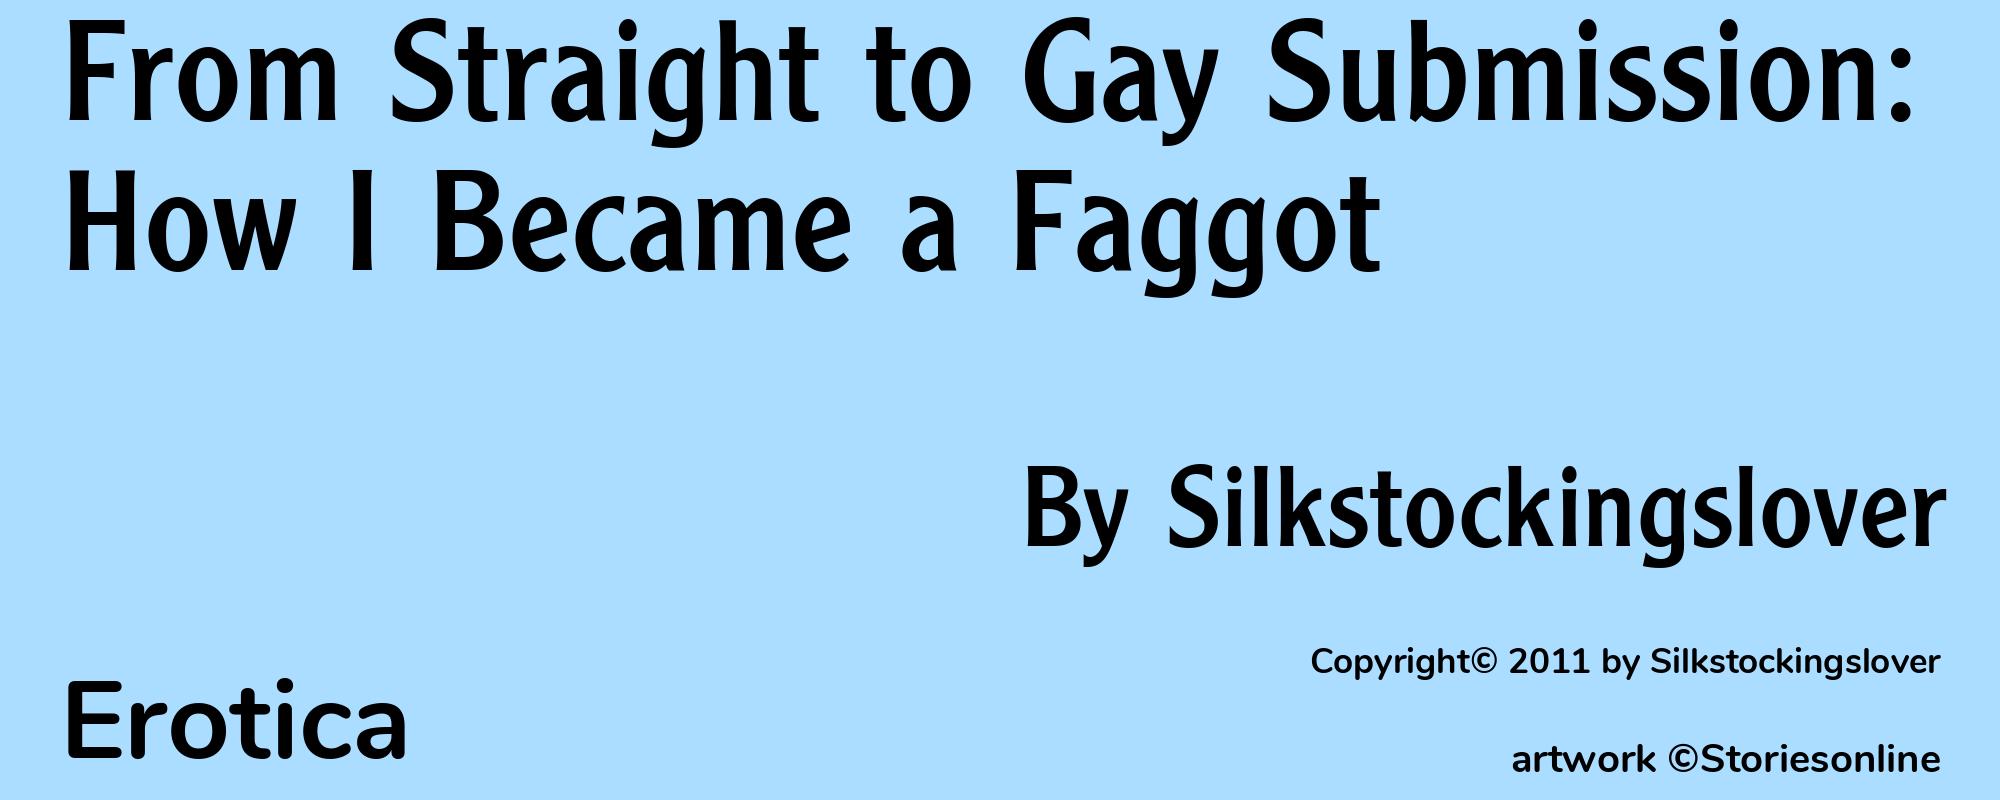 From Straight to Gay Submission: How I Became a Faggot - Cover